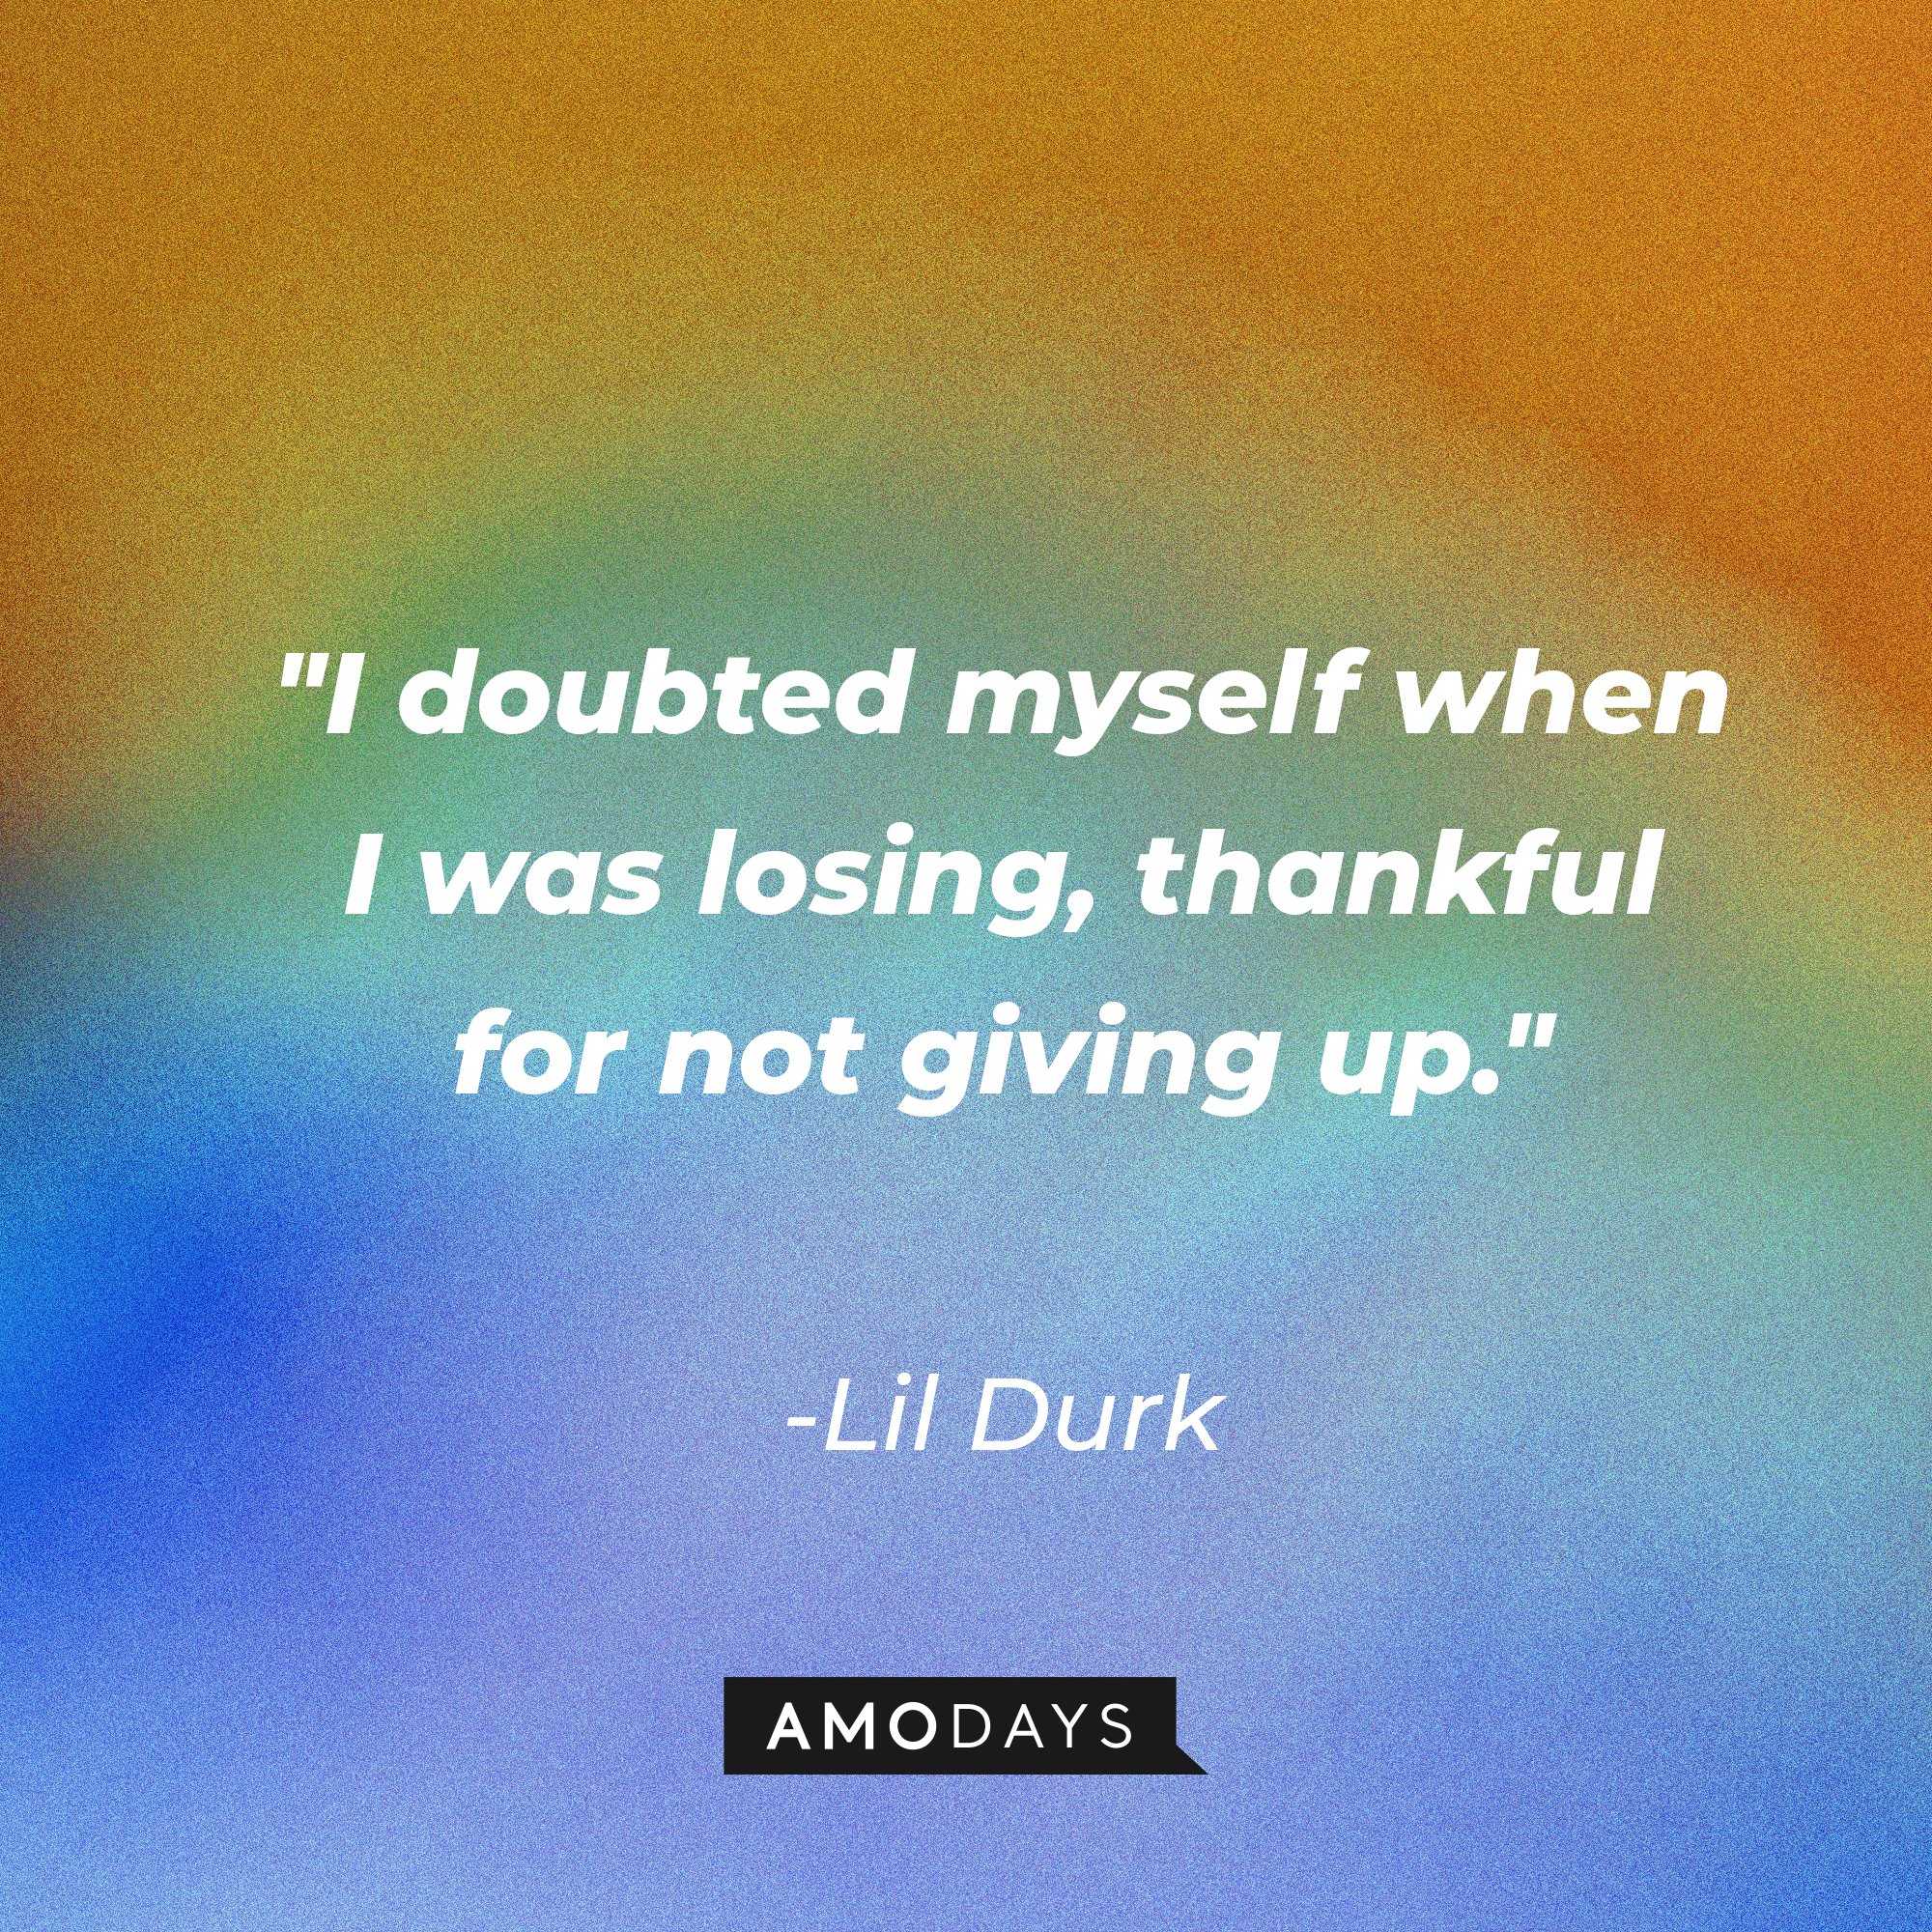 Lil Durk’s "I doubted myself when I was losing, thankful for not giving up." | Image: AmoDays 